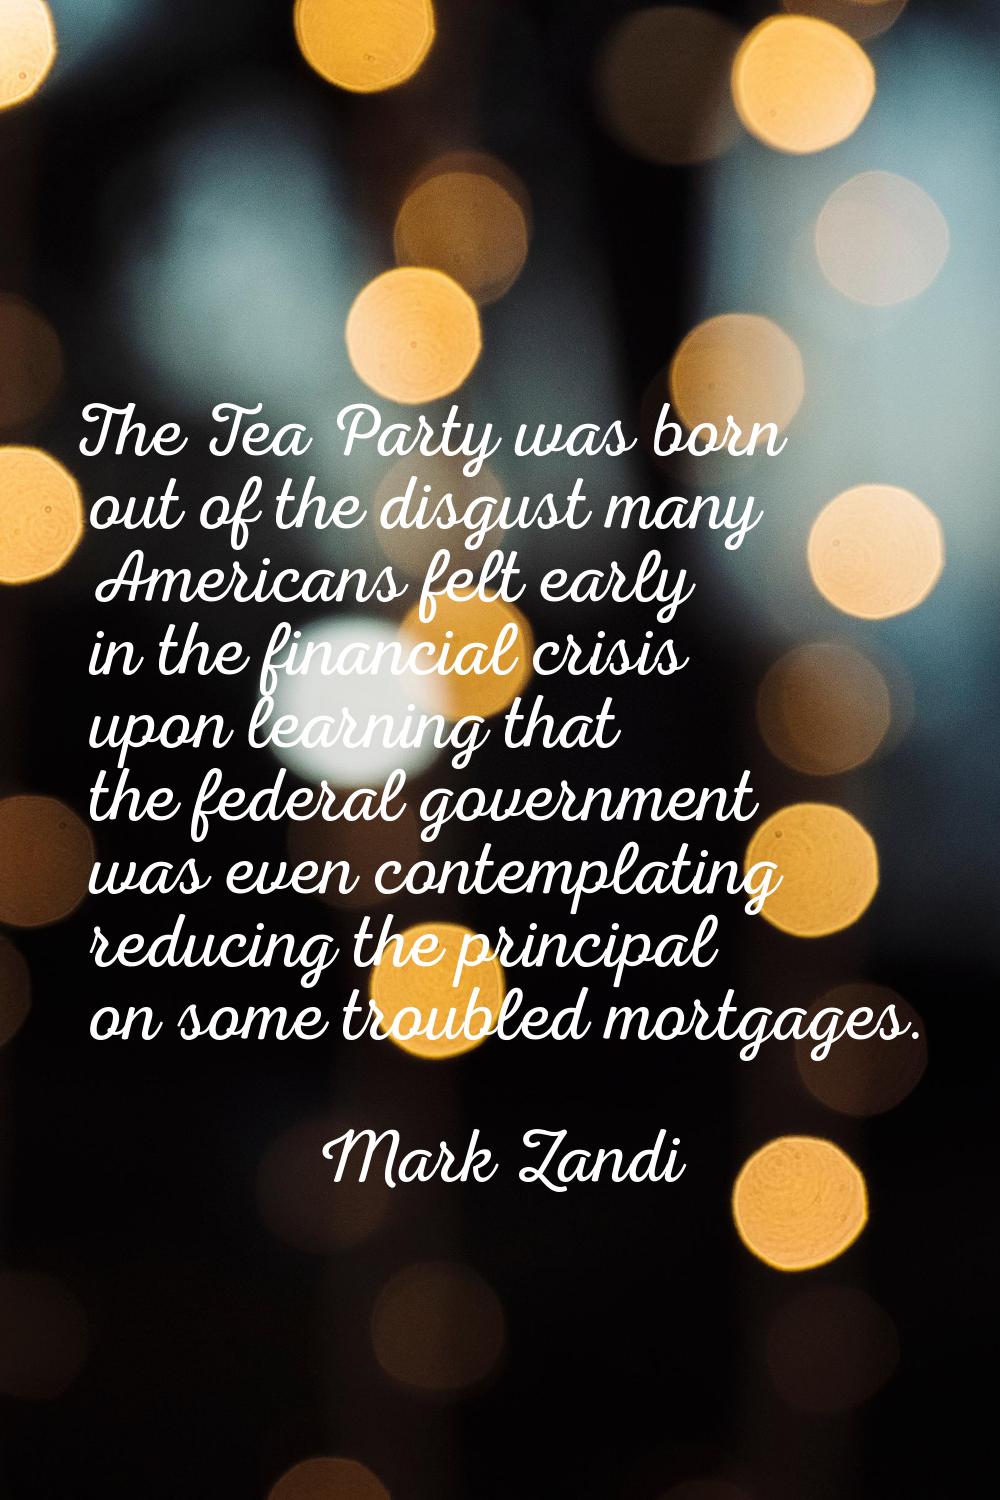 The Tea Party was born out of the disgust many Americans felt early in the financial crisis upon le